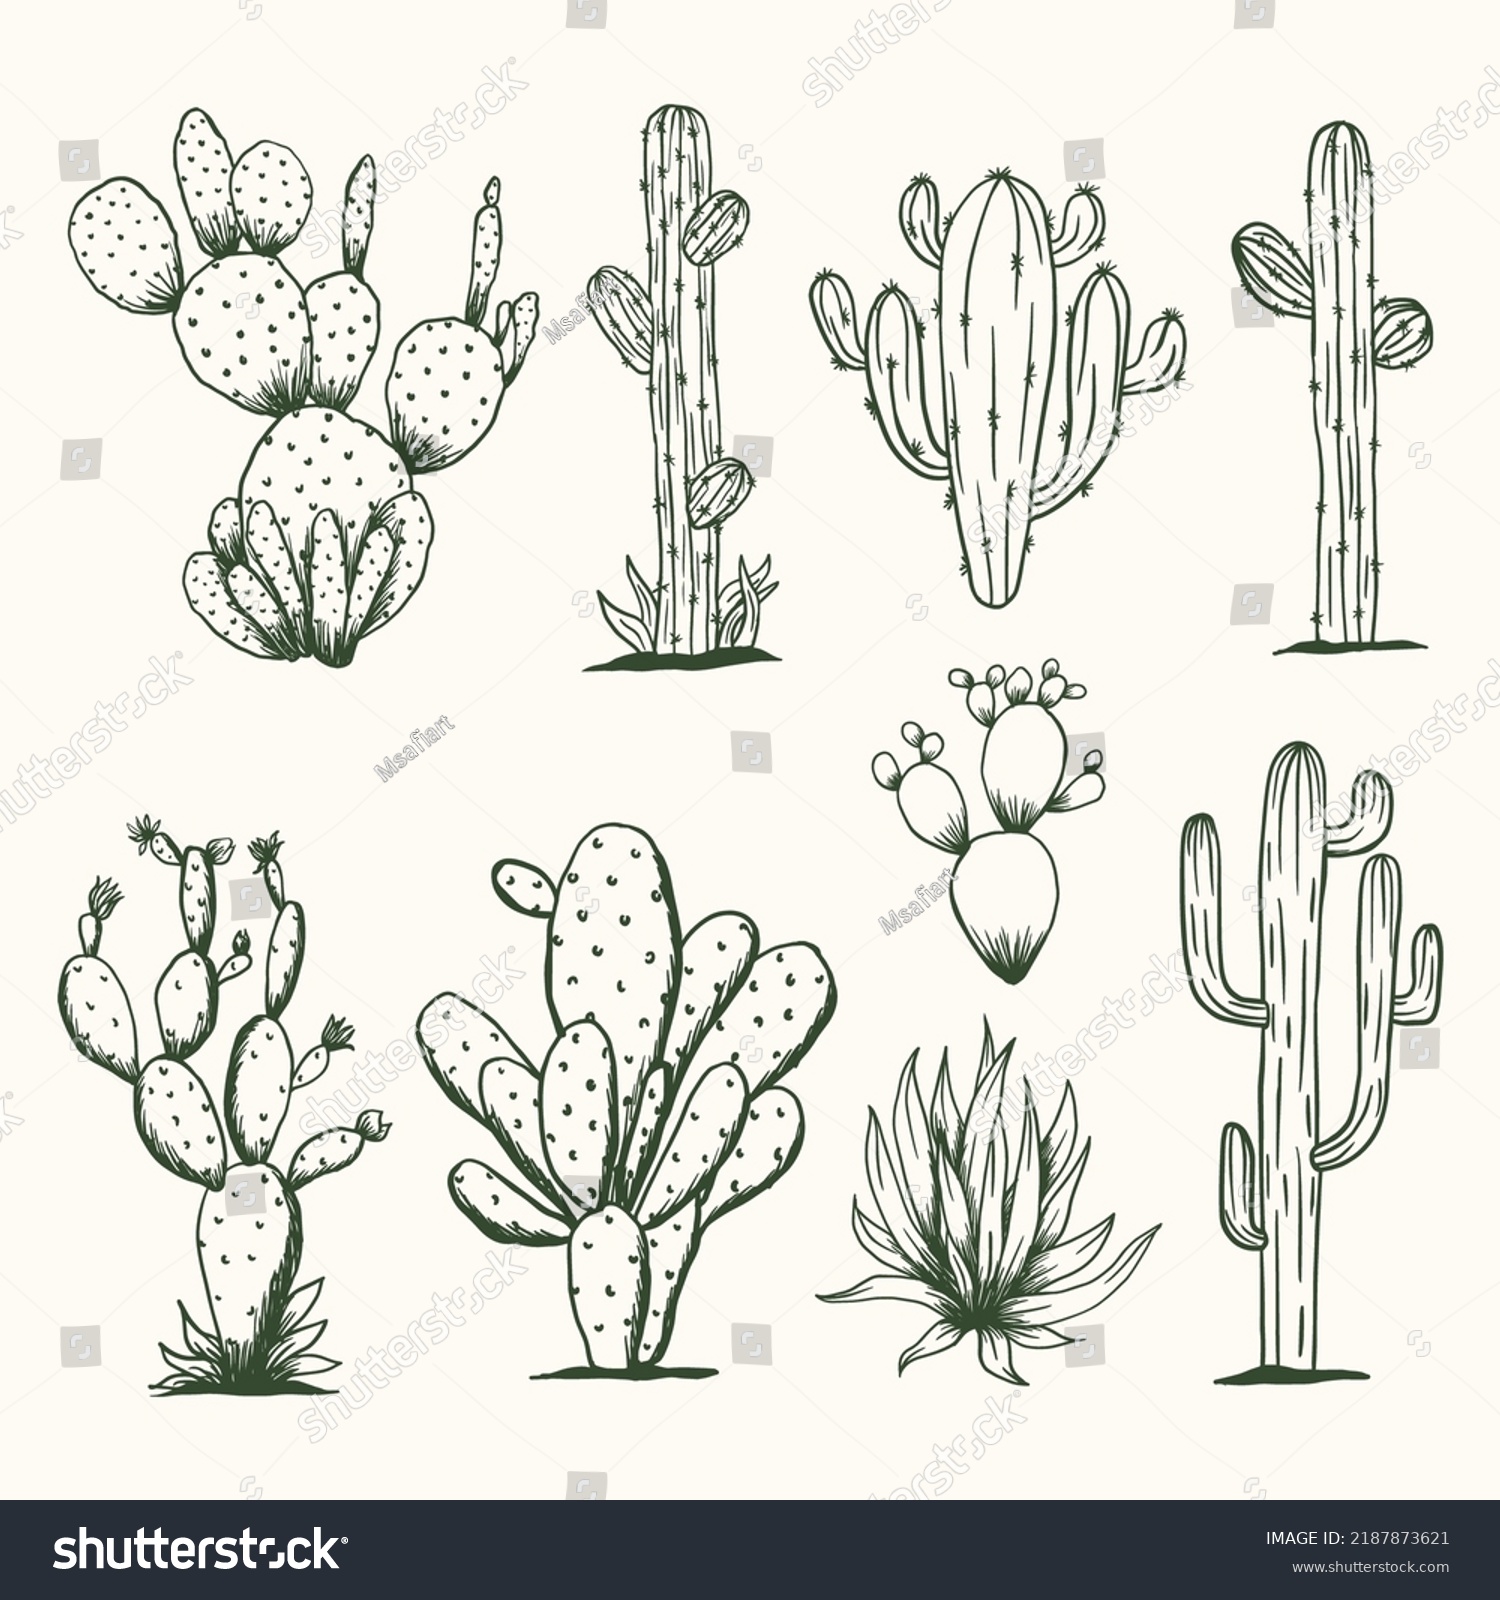 Hand Drawn cactus vector illustration. A set of vector illustration linear cactuses. Cactus vector illustrations. Hand drawn outline cactus set. #2187873621